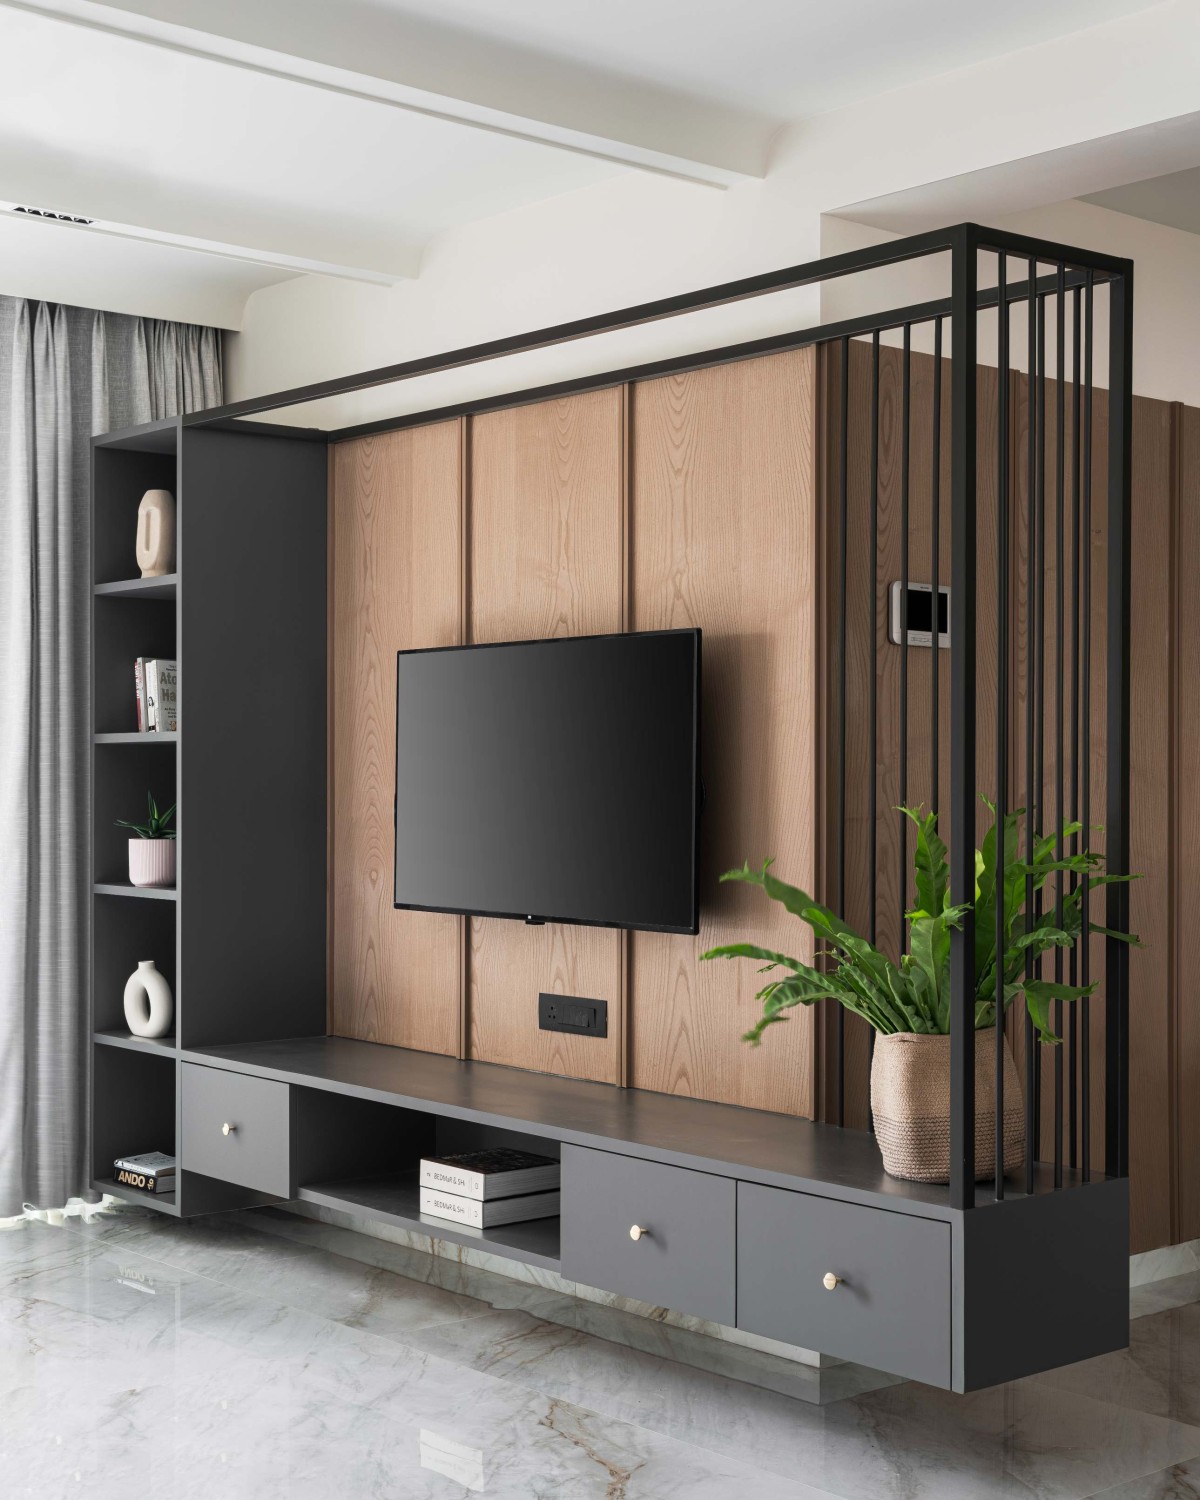 TV Unit of Tarang House by Studio Thoughts Per Meter